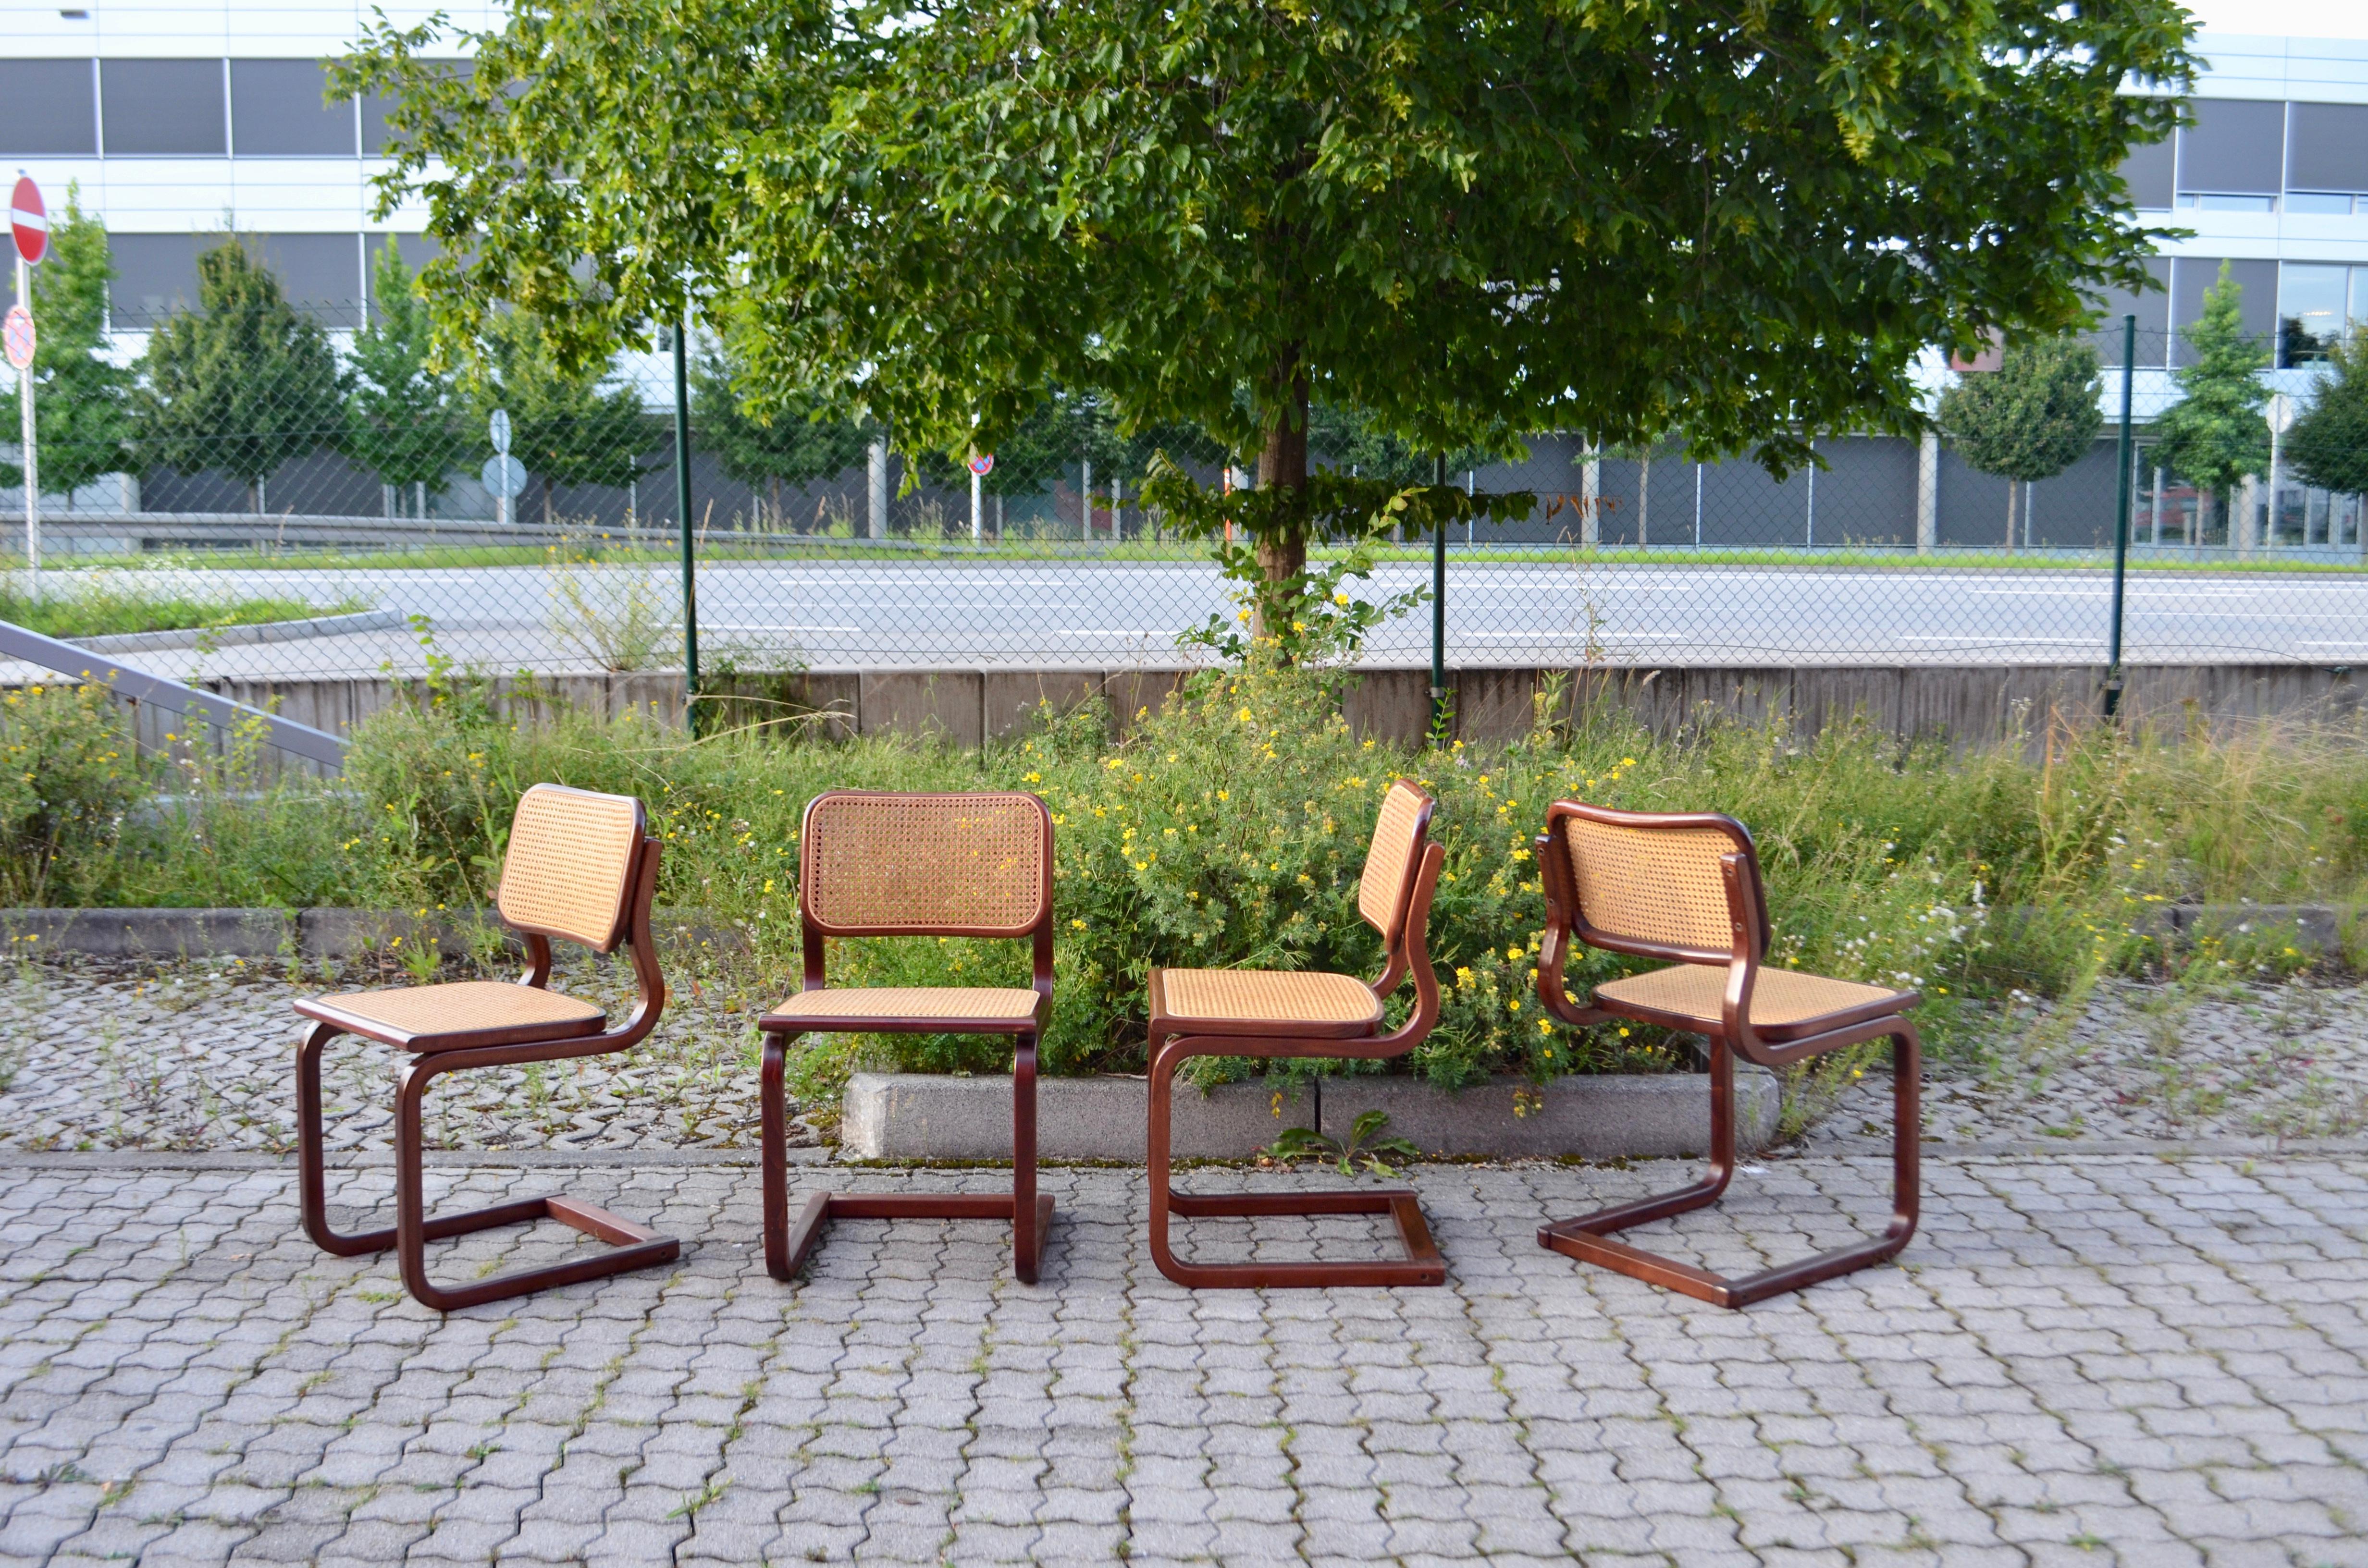 These Cantilever vintage chairs are made in Italy from the 70ties
In the manner of Marcel Breuer the chairs are strongly inspired by the Bauhaus Movement and also from Finland Designer Alvar Aalto.
It has the same design as the well known Marcel